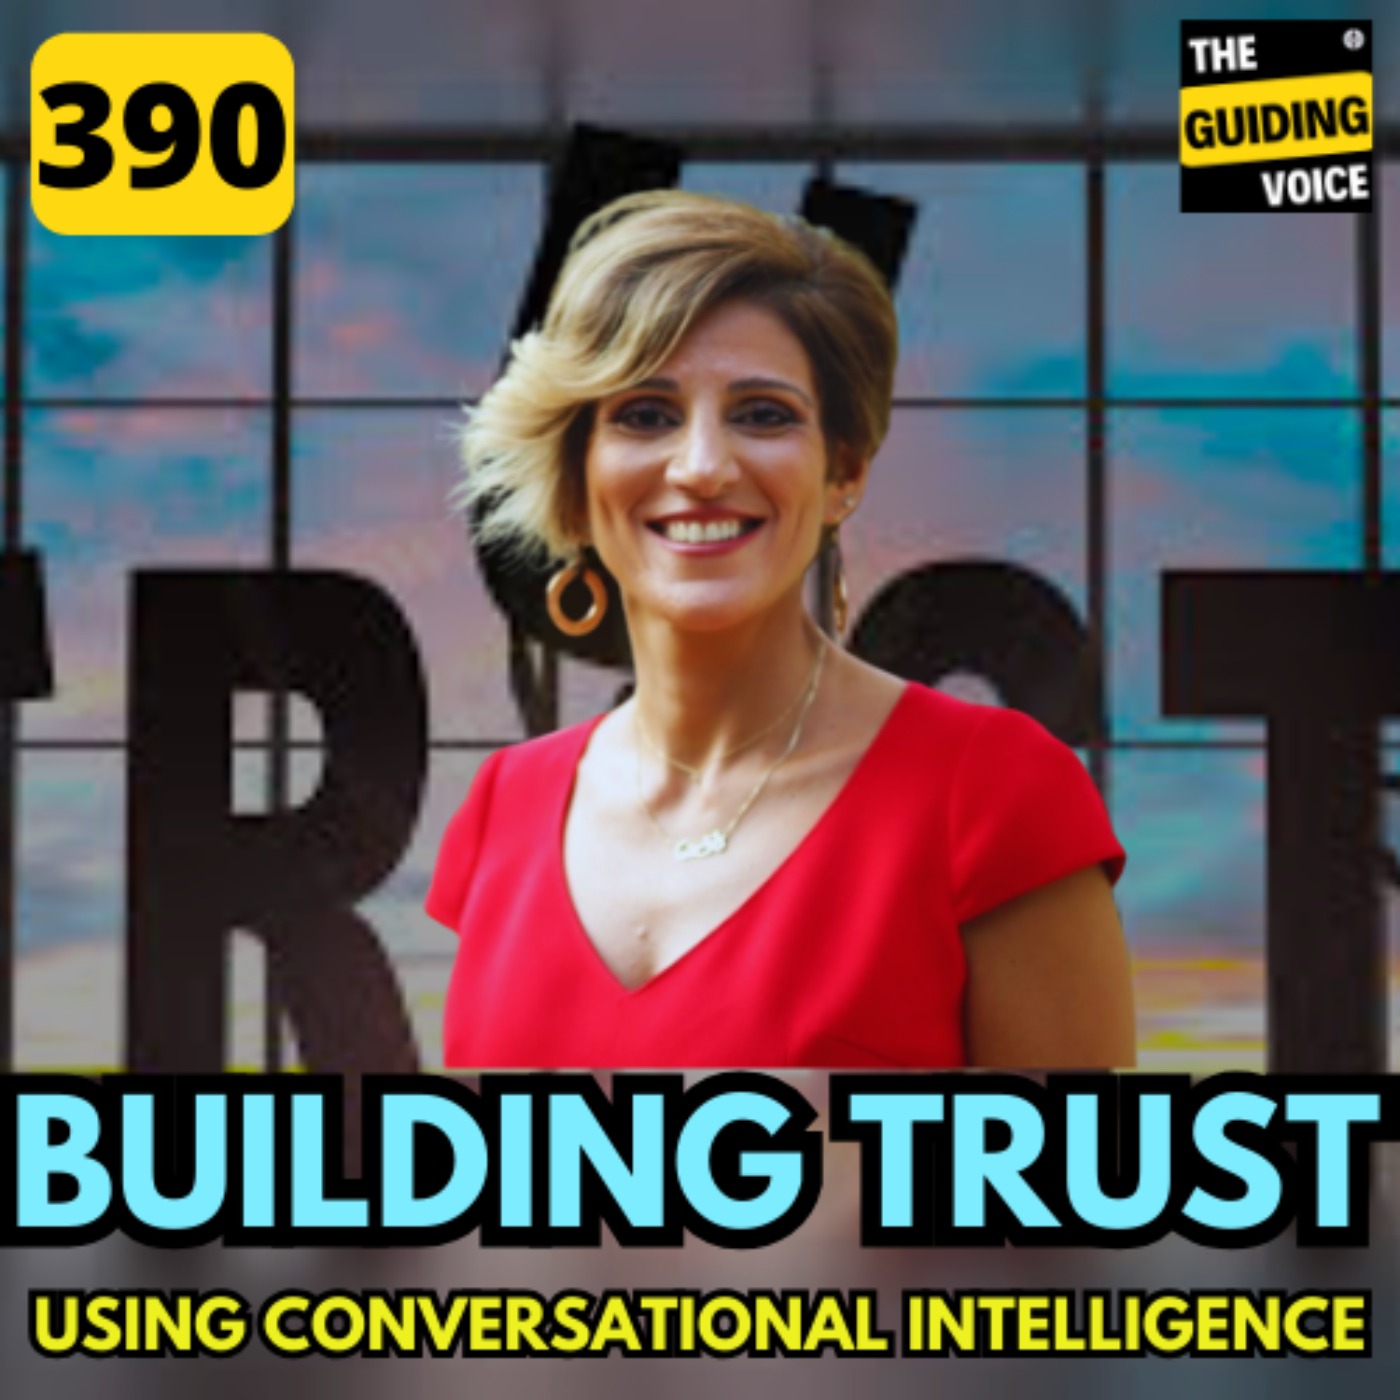 Converstational intelligence for building  trust and relations | Nadine | #TGV390